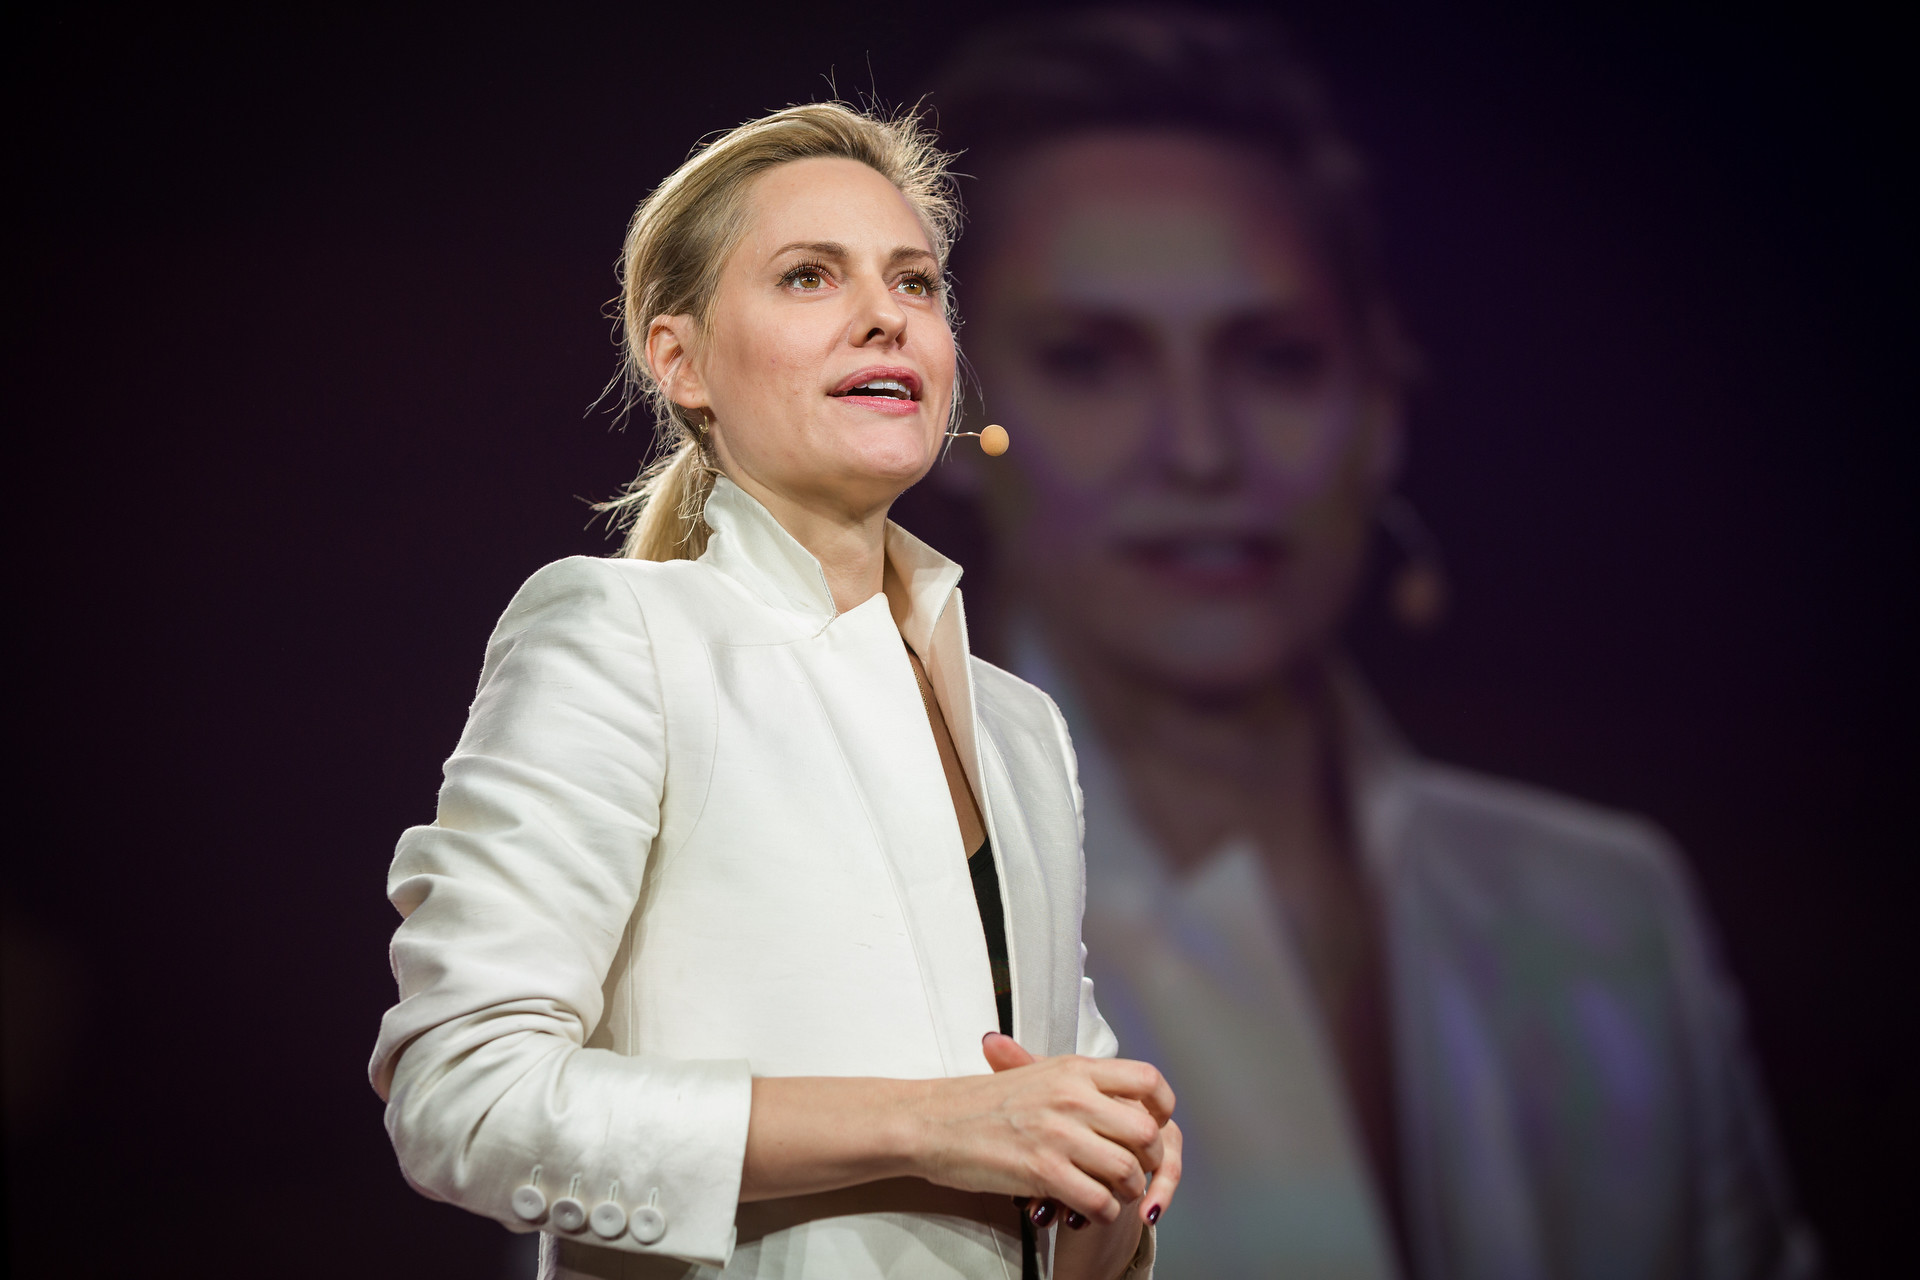 "TED2014_RL_2R9B9133_1920" by TED Conference is licensed under CC BY-NC 2.0. Image shows Aimee Mullins wearing a white jacket with a a white microphone headset on, standing in front of a photo or video or herself on a large screen